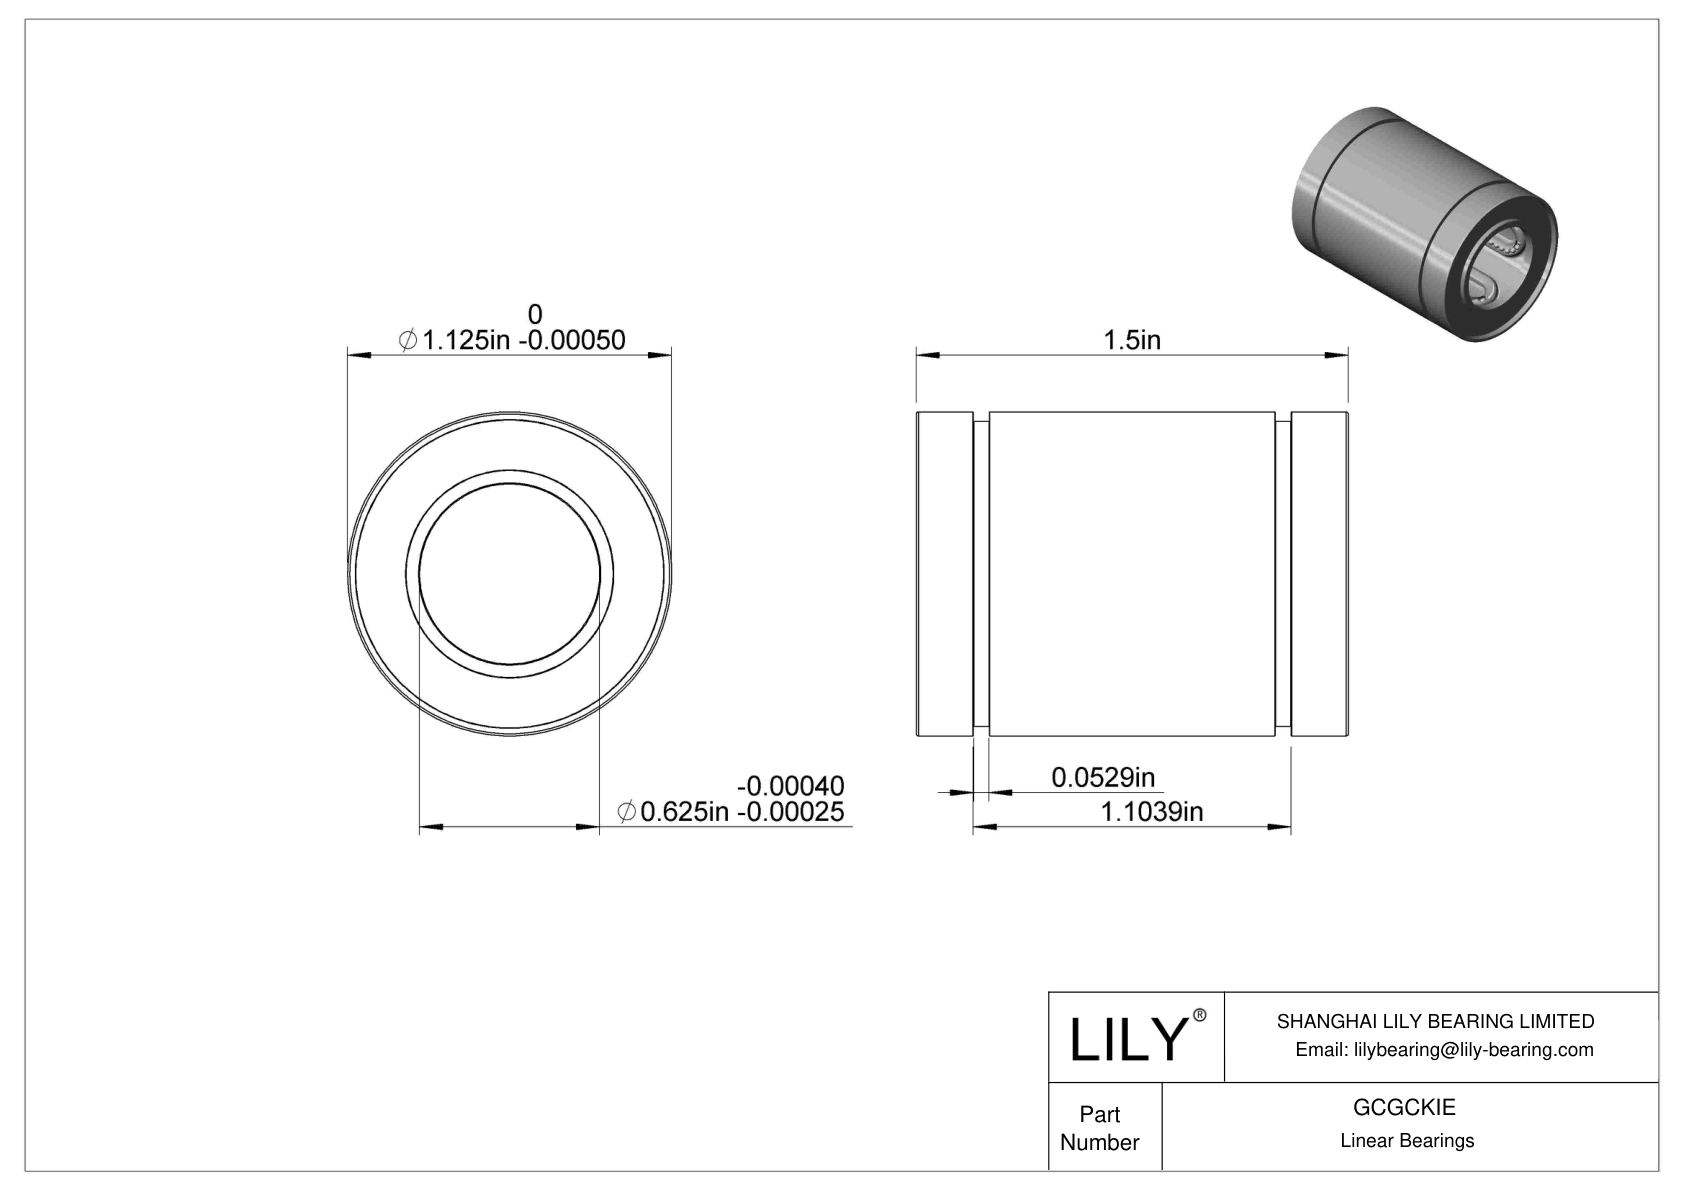 GCGCKIE Common Linear Ball Bearings cad drawing